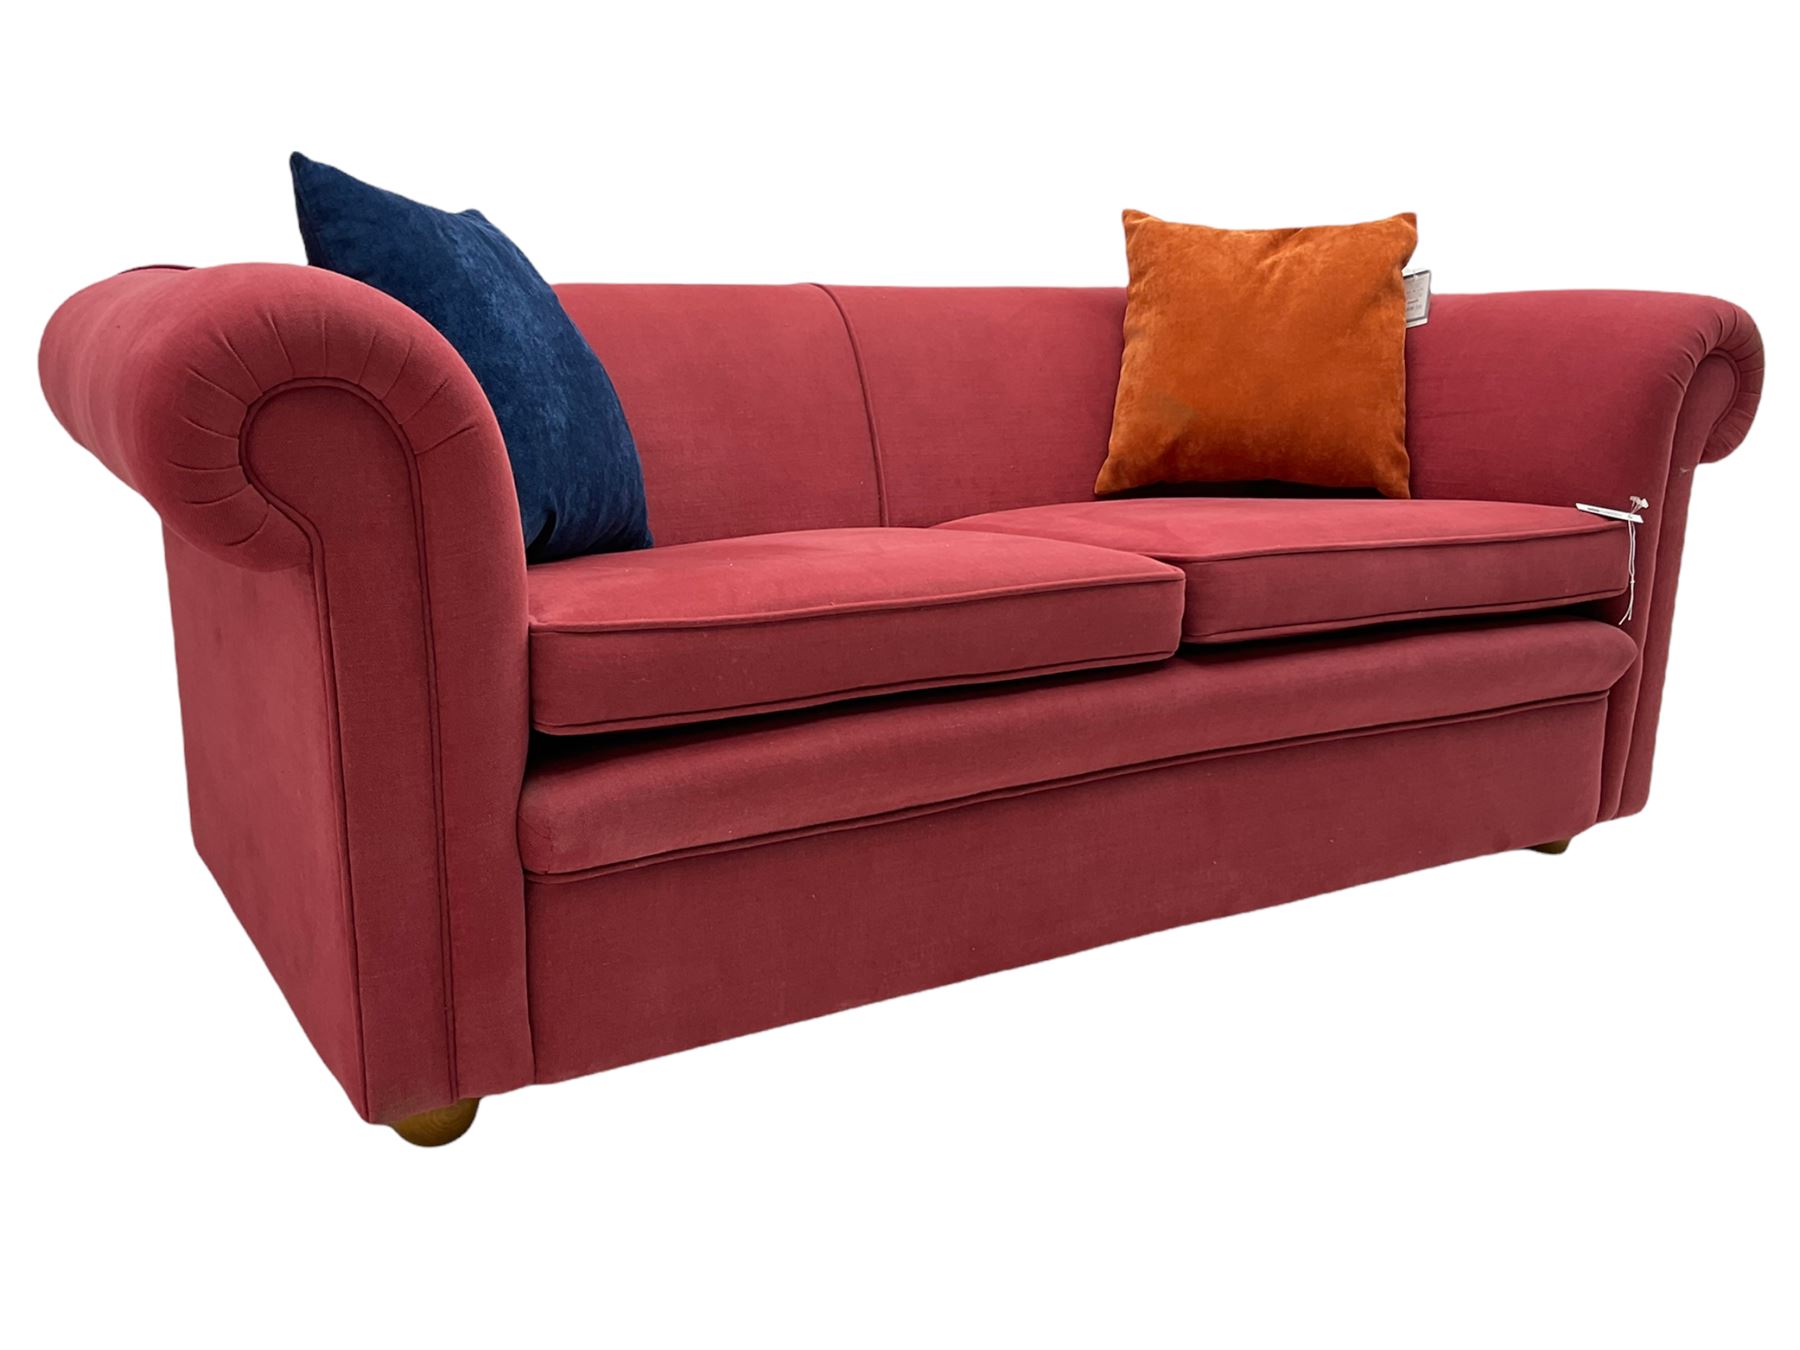 Two seat Chesterfield sofa - Image 6 of 6